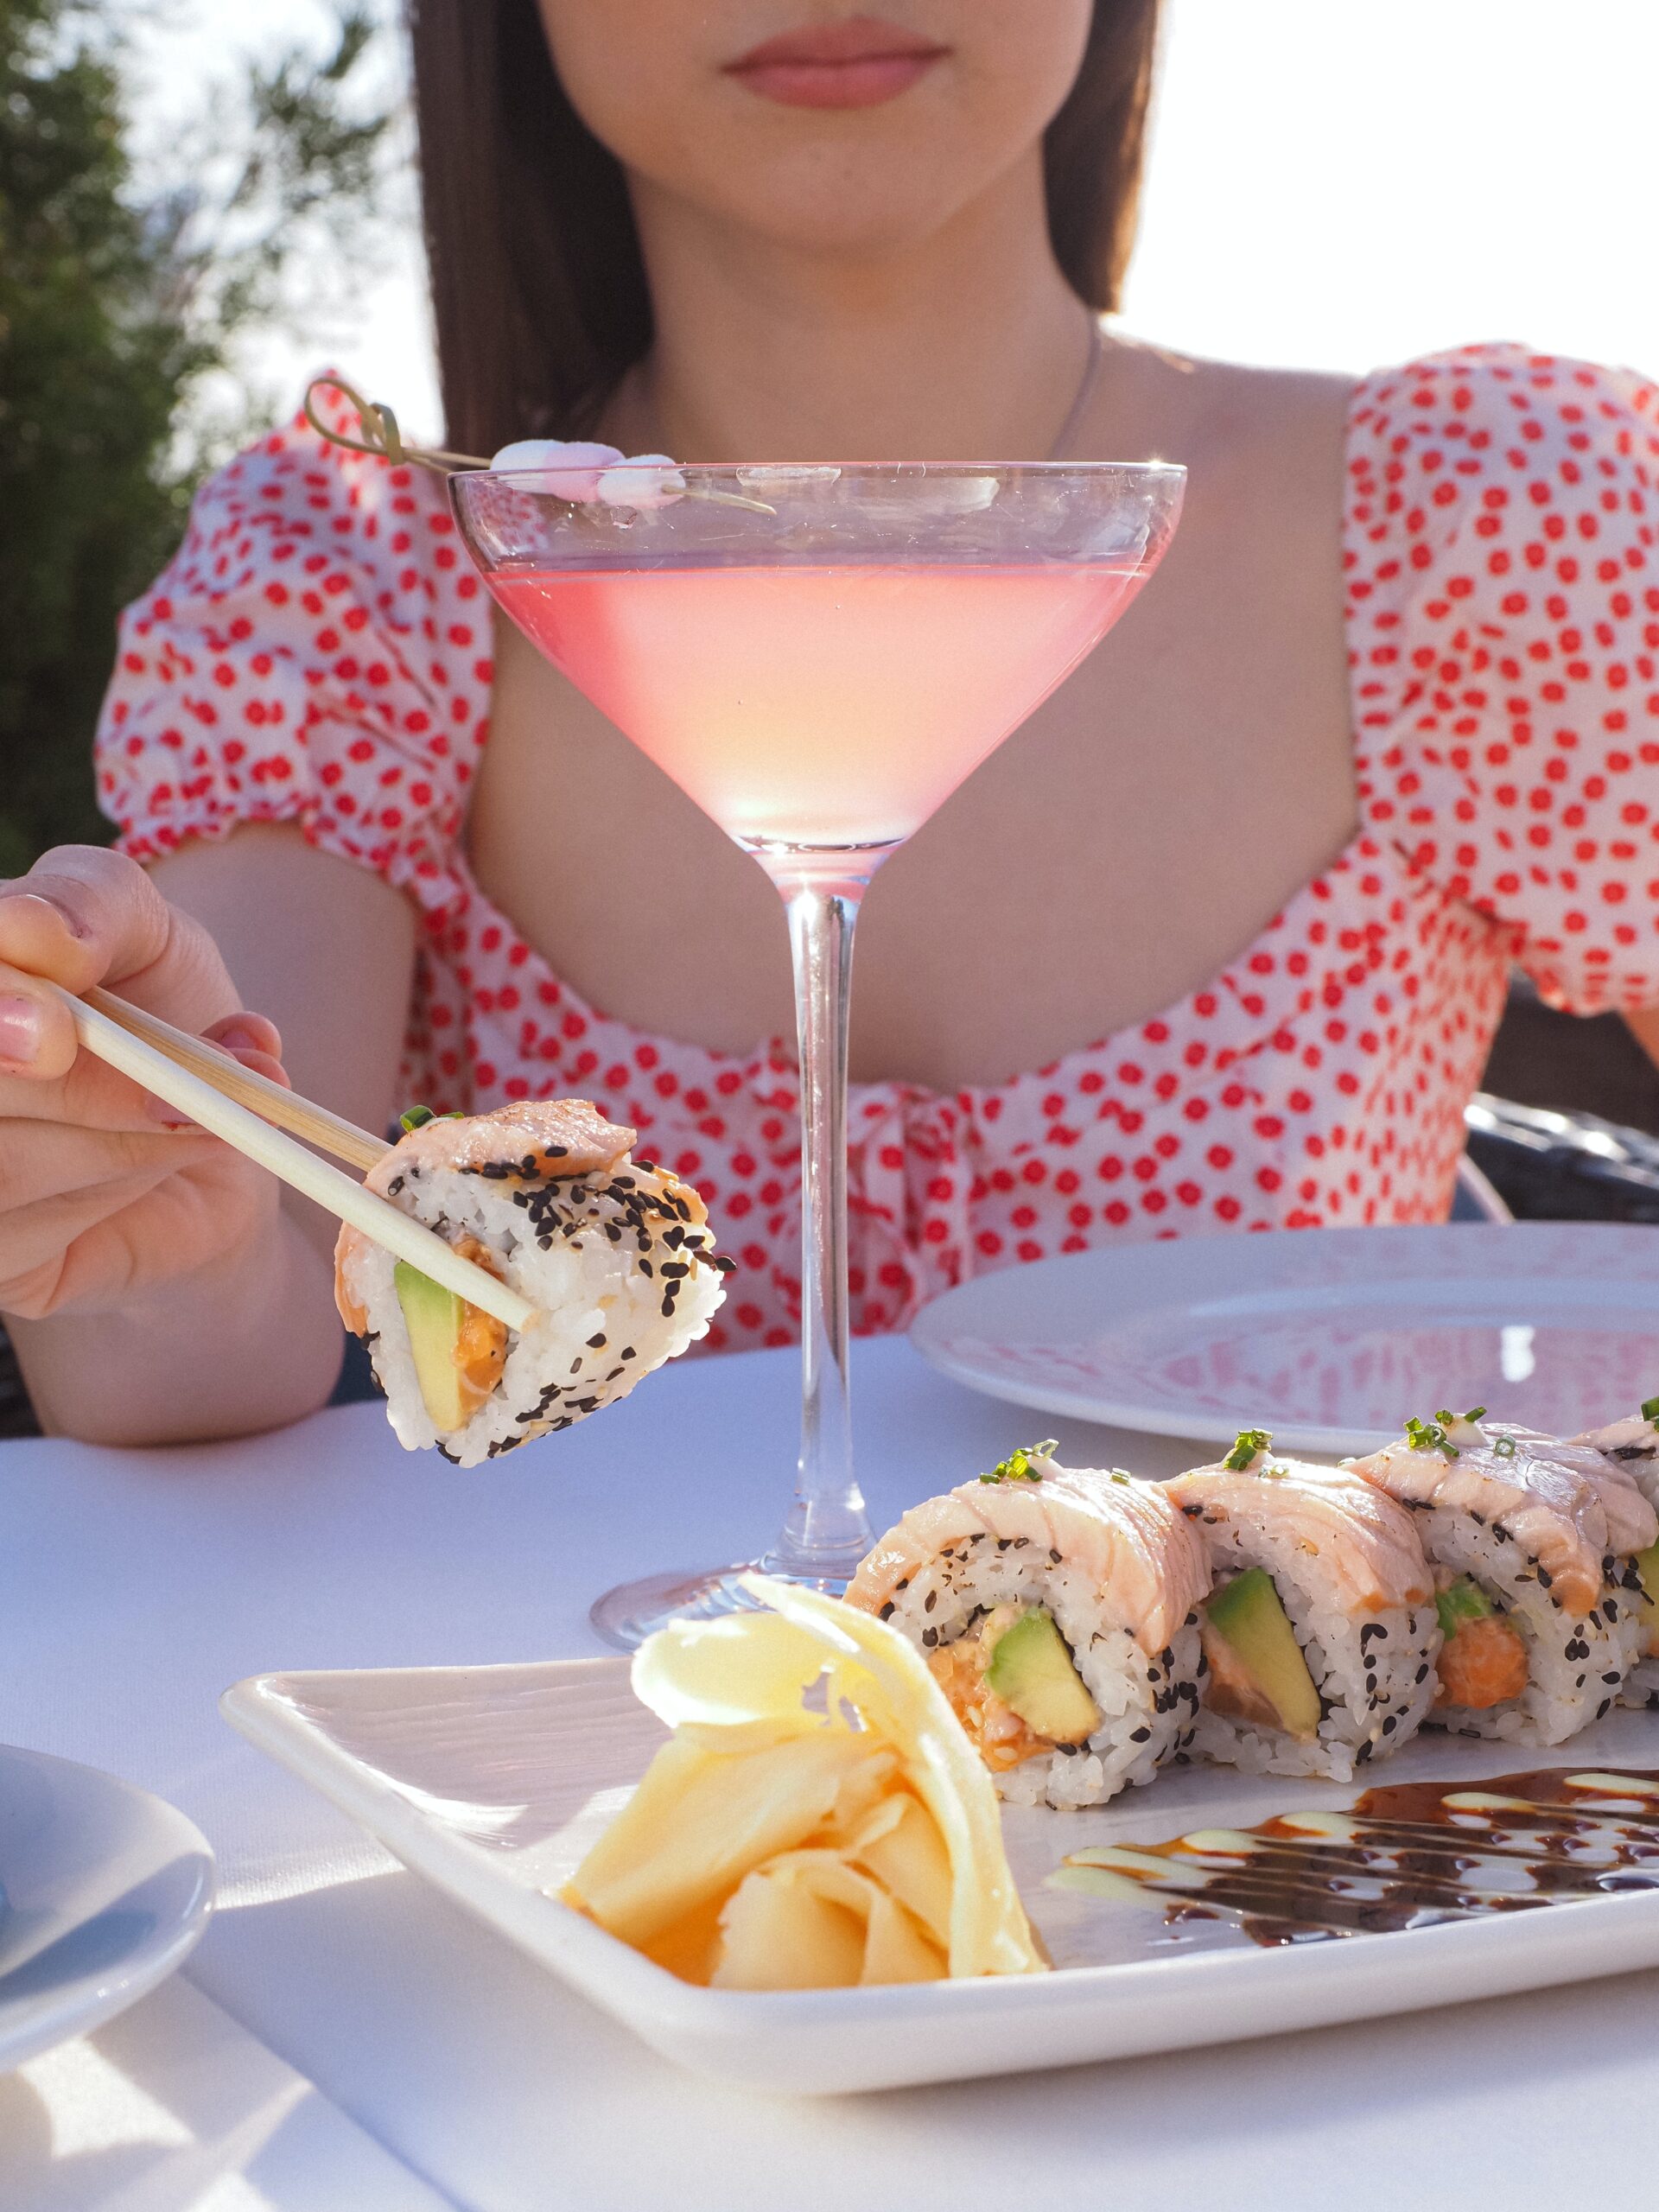 Woman eating sushi and with collagen drink in her glass. This is for the post fish collagen benefits.